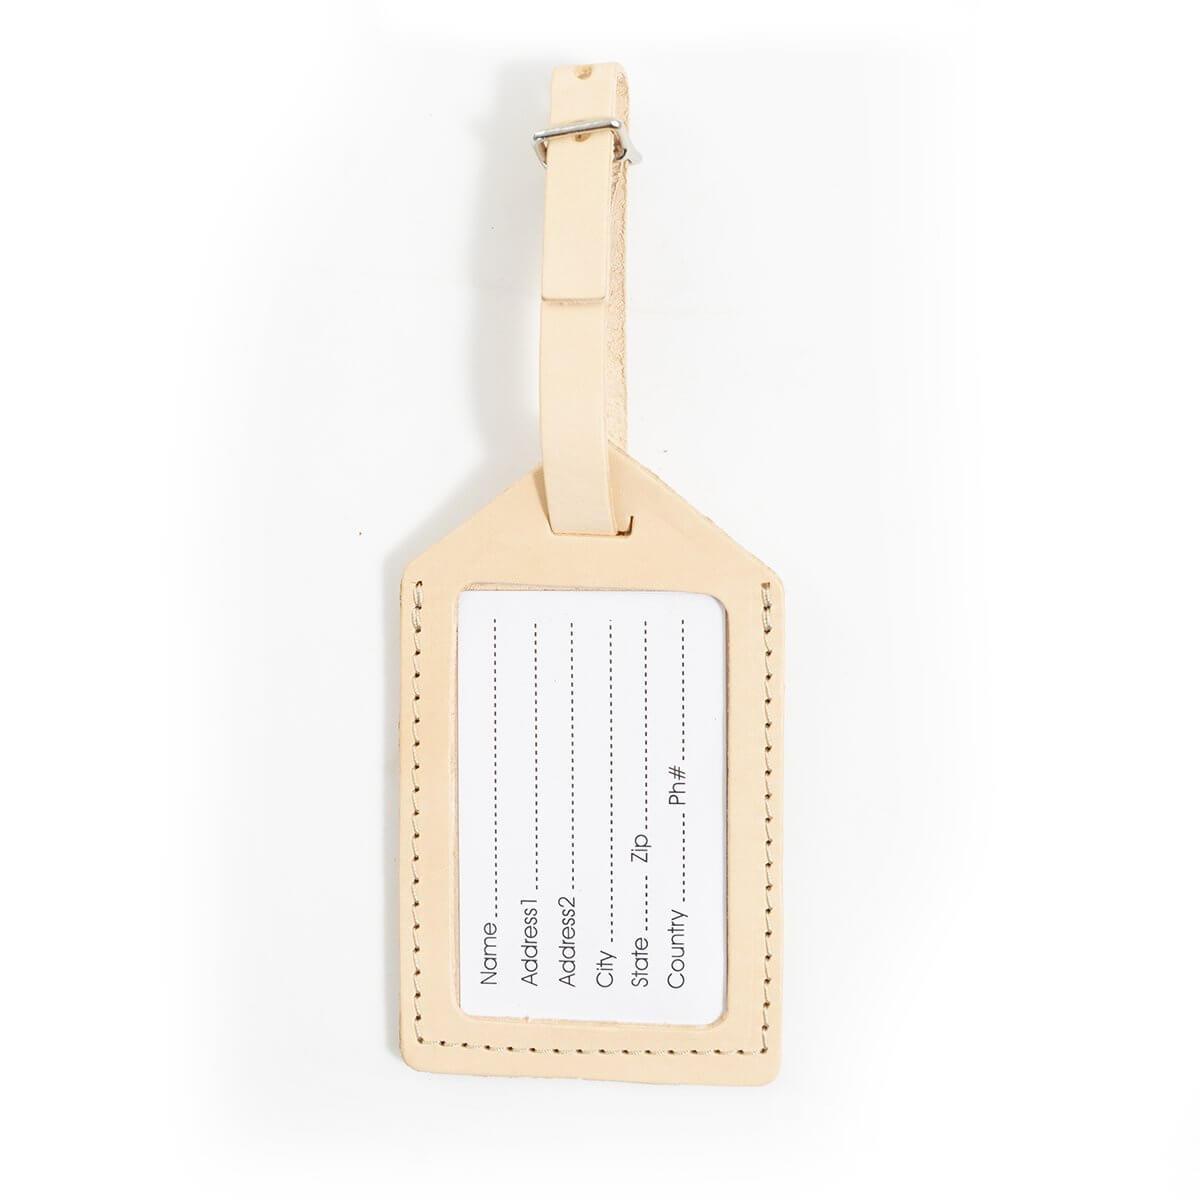 Natural Leather Luggage Tag